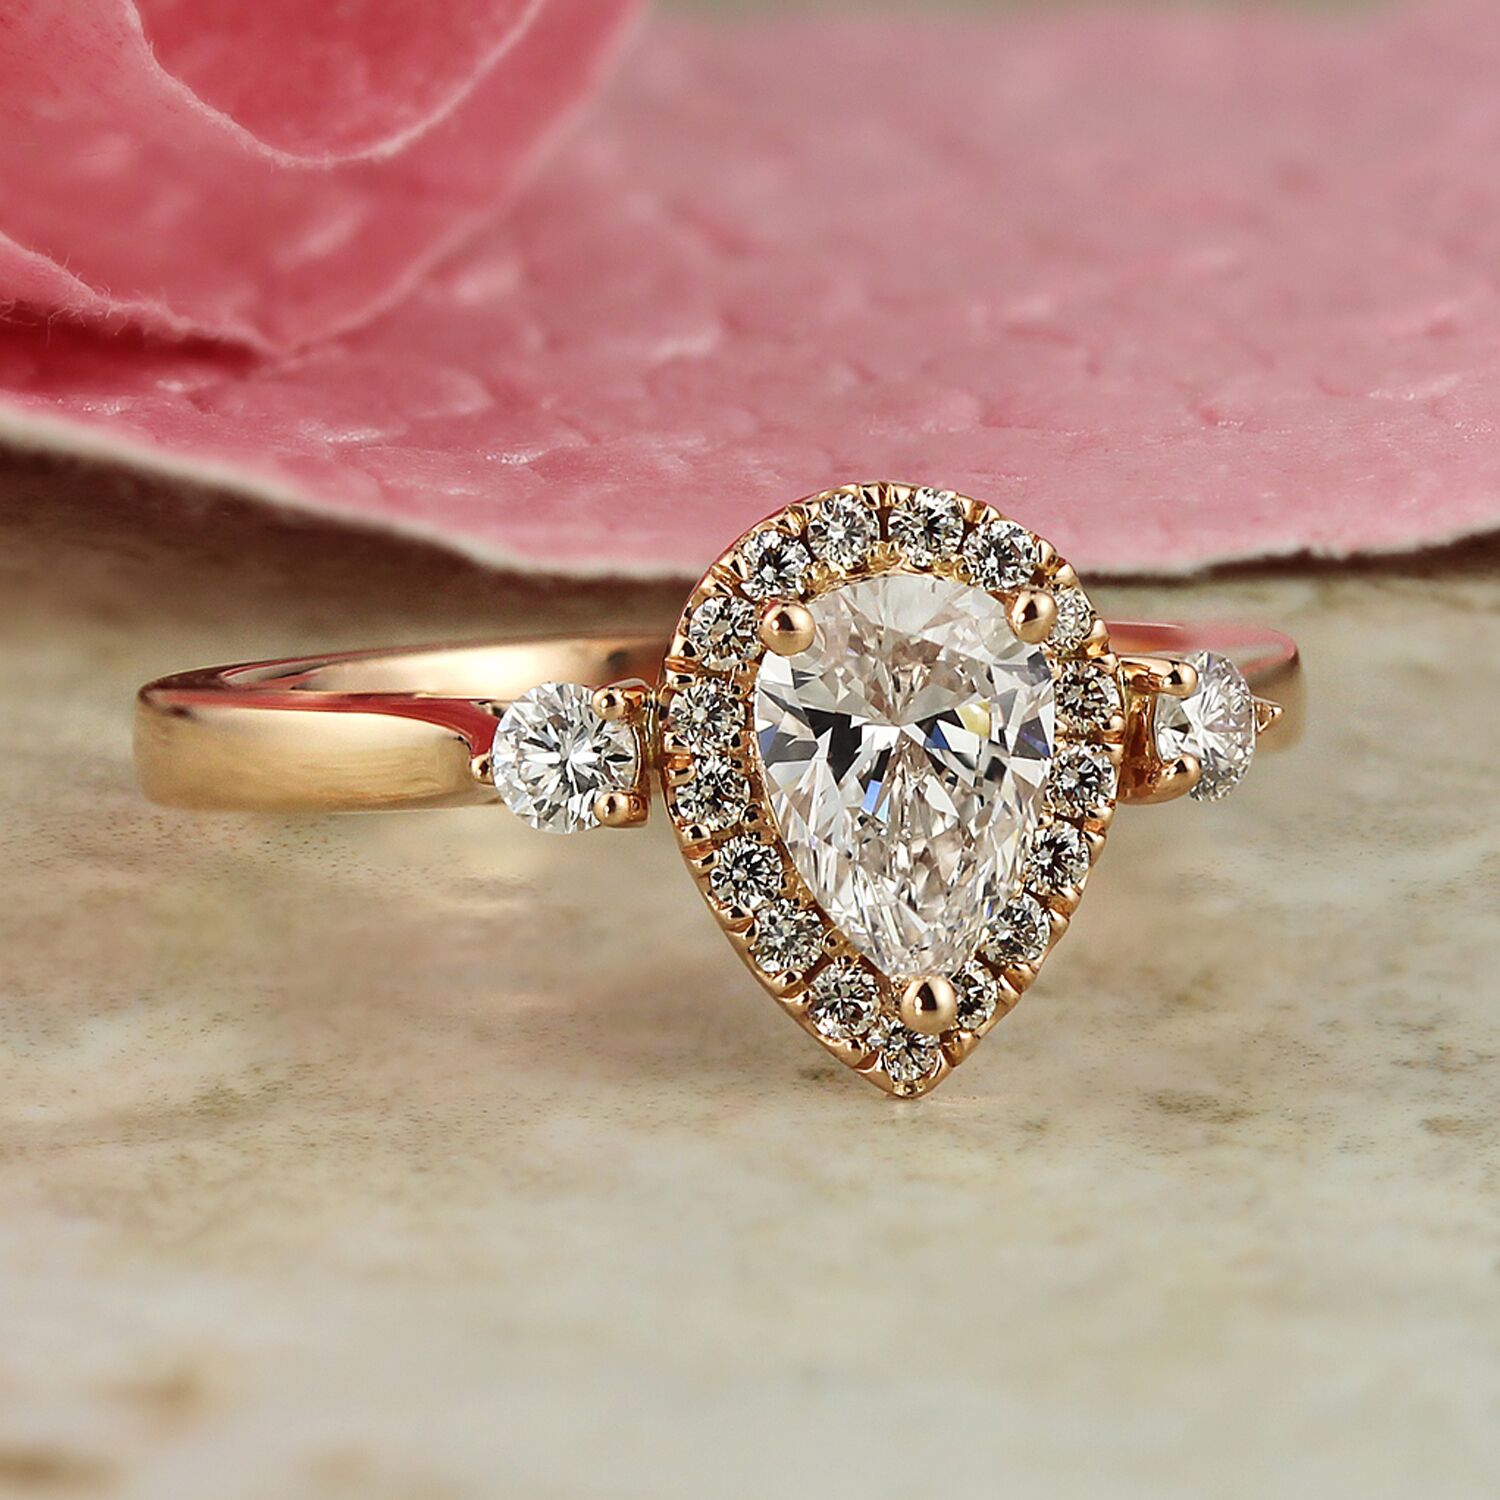 Engagement Ring Trends by Decade - Leo Hamel Fine Jewelers Blog